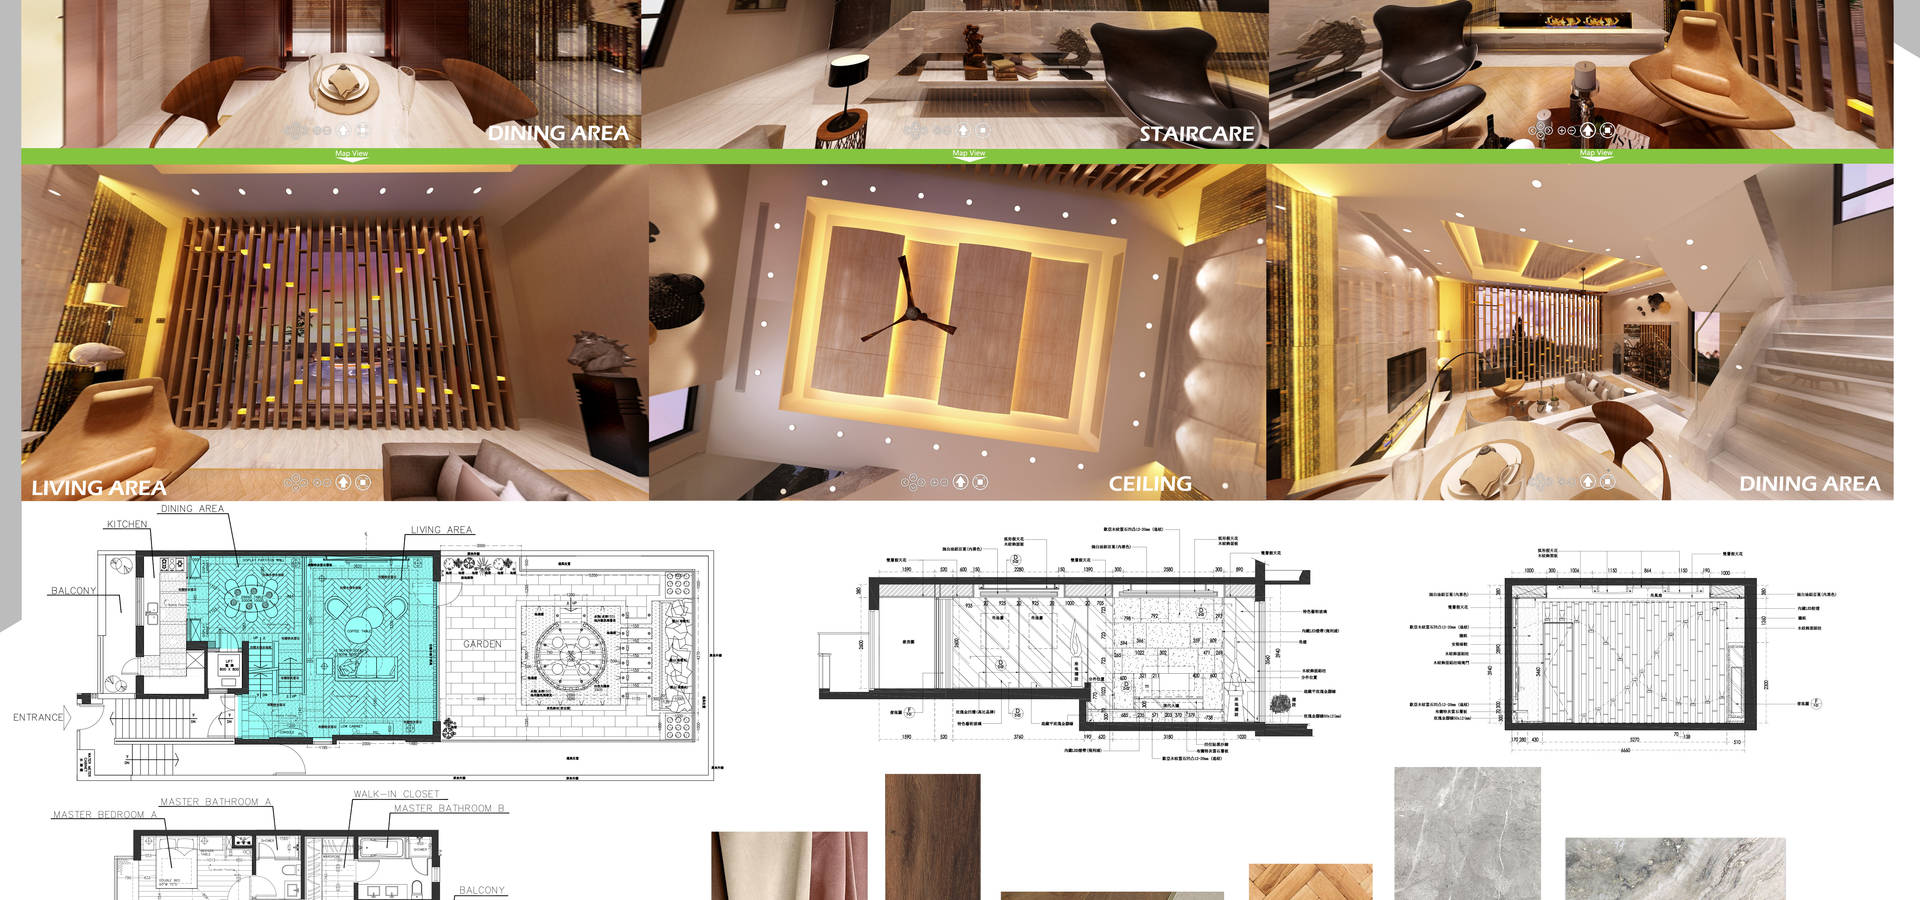 design for life interiors limited